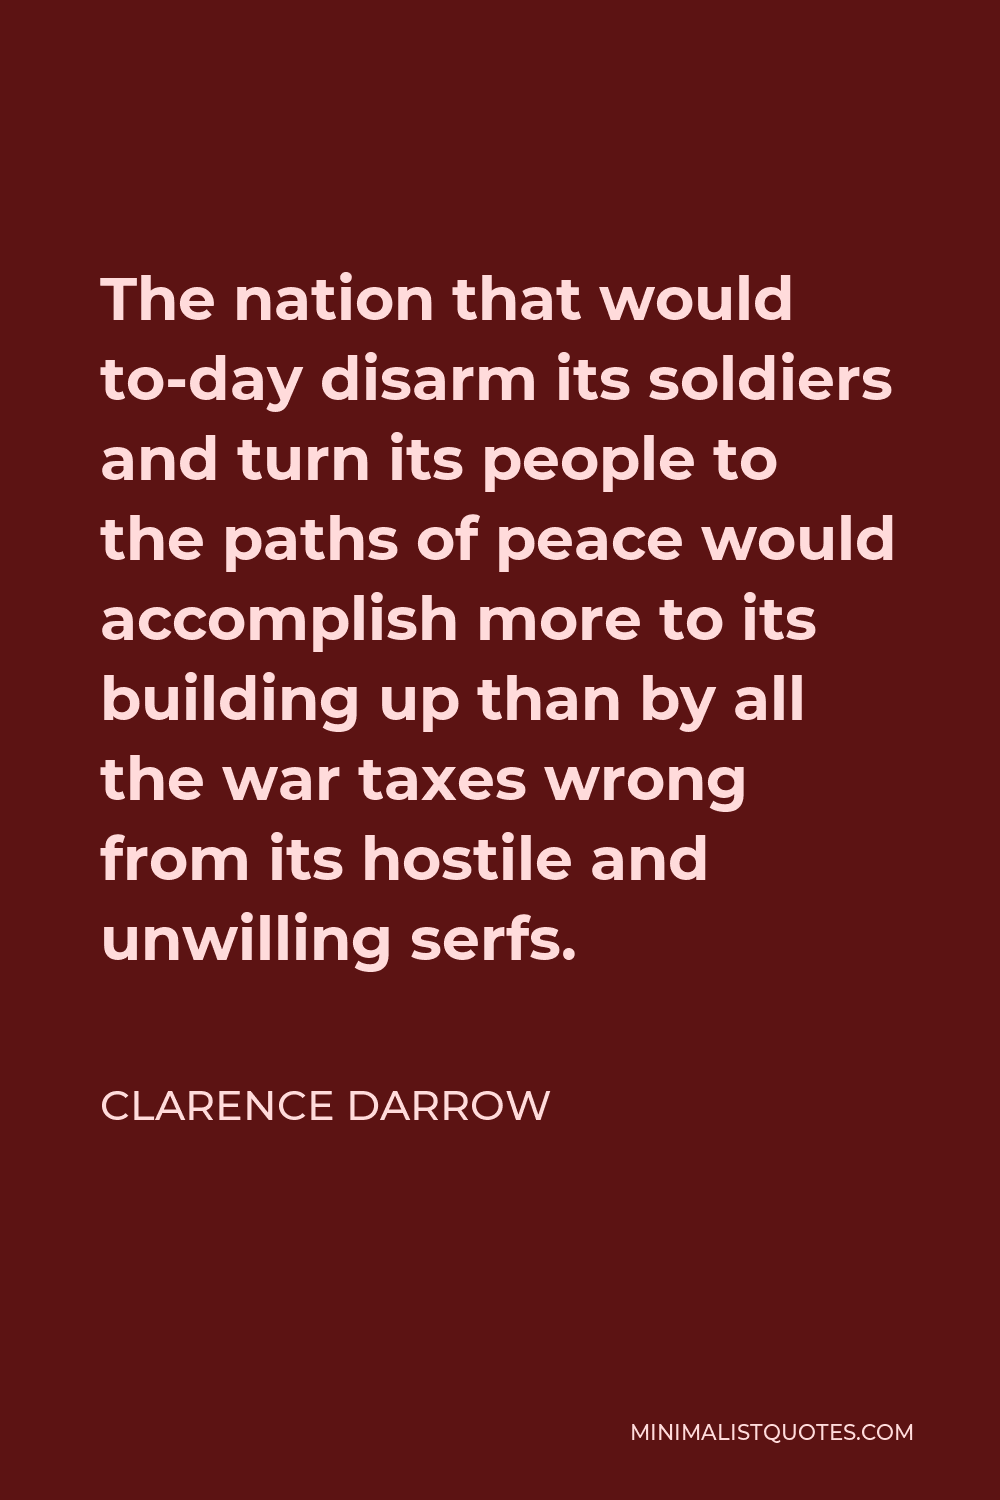 Clarence Darrow Quote - The nation that would to-day disarm its soldiers and turn its people to the paths of peace would accomplish more to its building up than by all the war taxes wrong from its hostile and unwilling serfs.